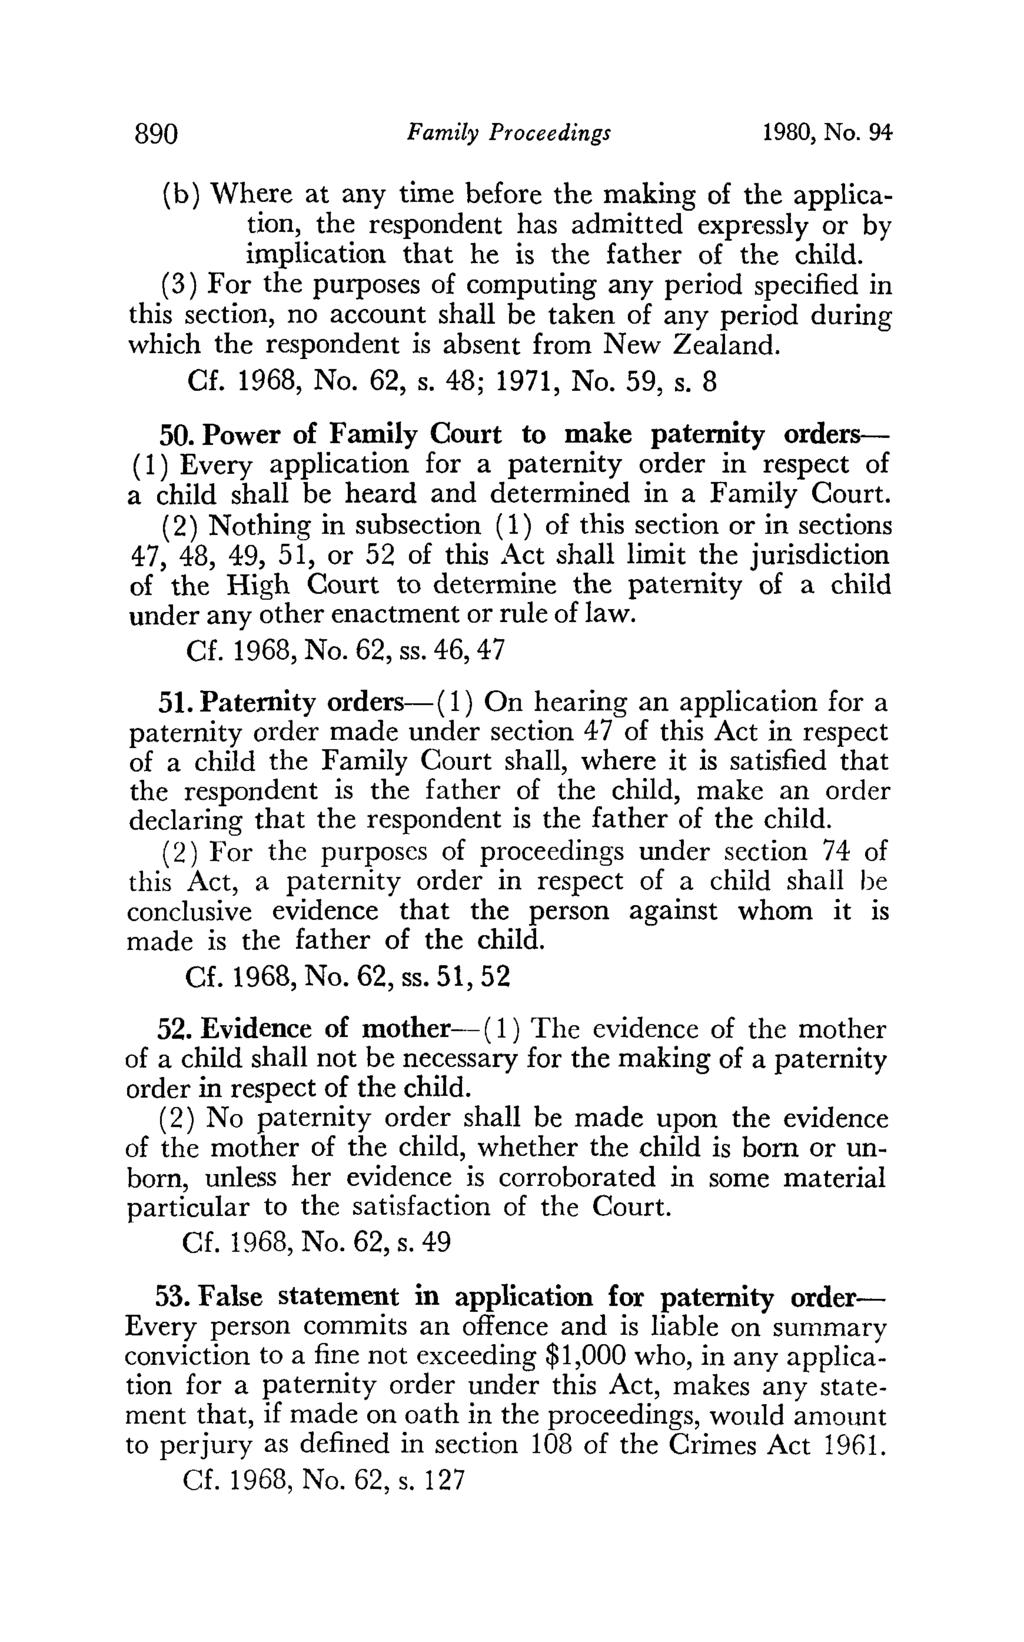 890 Family Proceedings 1980, No. 94 (b) Where at any time before the making of the application, the respondent has admitted expressly or by implication that he is the father of the child.